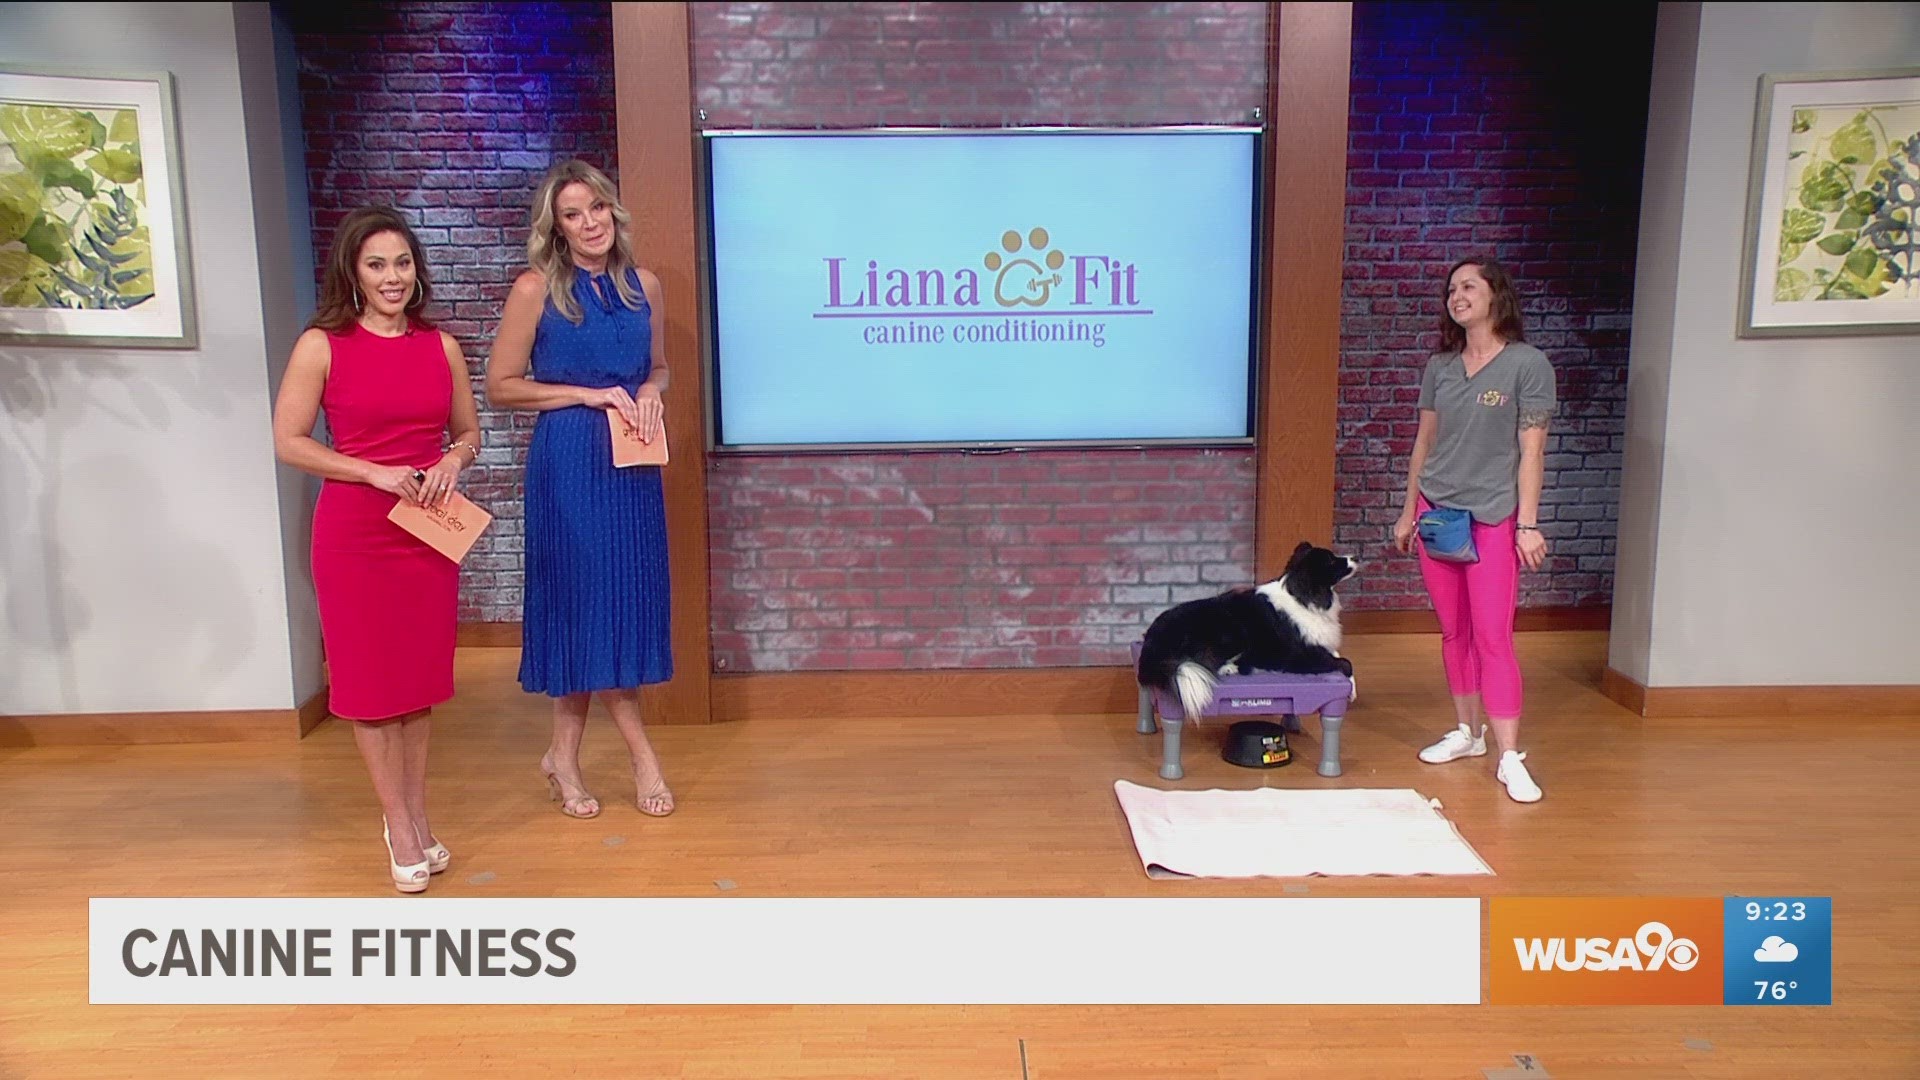 Certified canine fitness trainer Liana Burgoyne, shares tips on how to keep your pet dog in shape. Check out LianaFit Canine Conditioning at lianafit.com